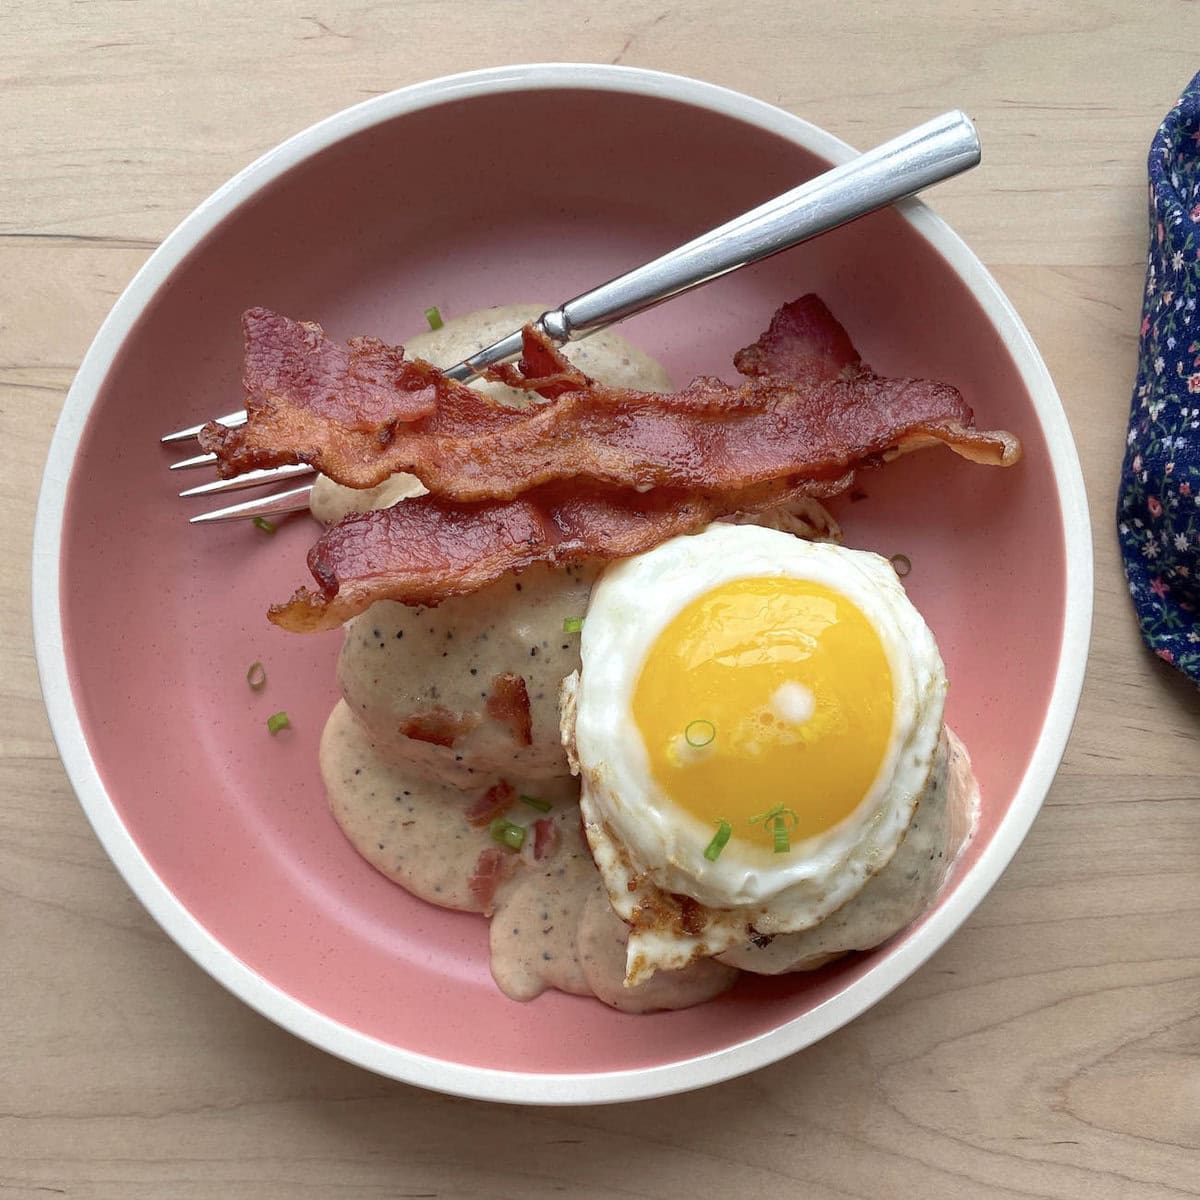 Two biscuits with two strips of bacon topped with bacon gravy in a pink bowl topped with a fried egg.